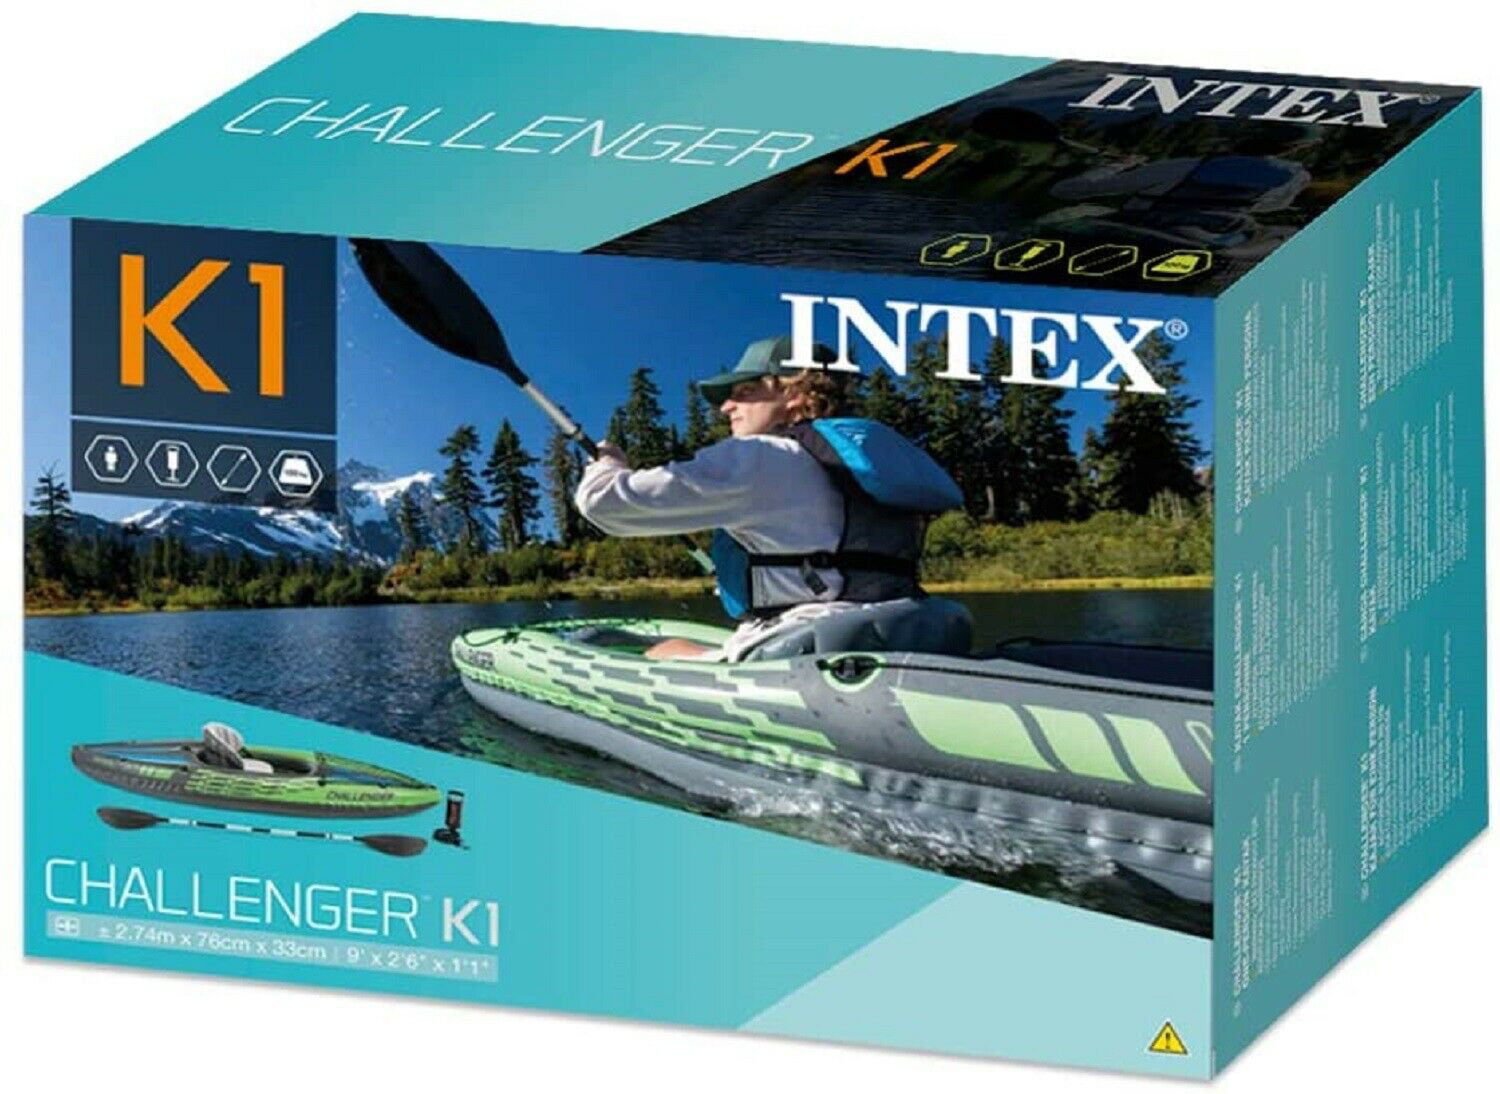 Pump Intex Challenger K1 Inflatable 1 Person Kayak Canoe with Aluminum Oars 